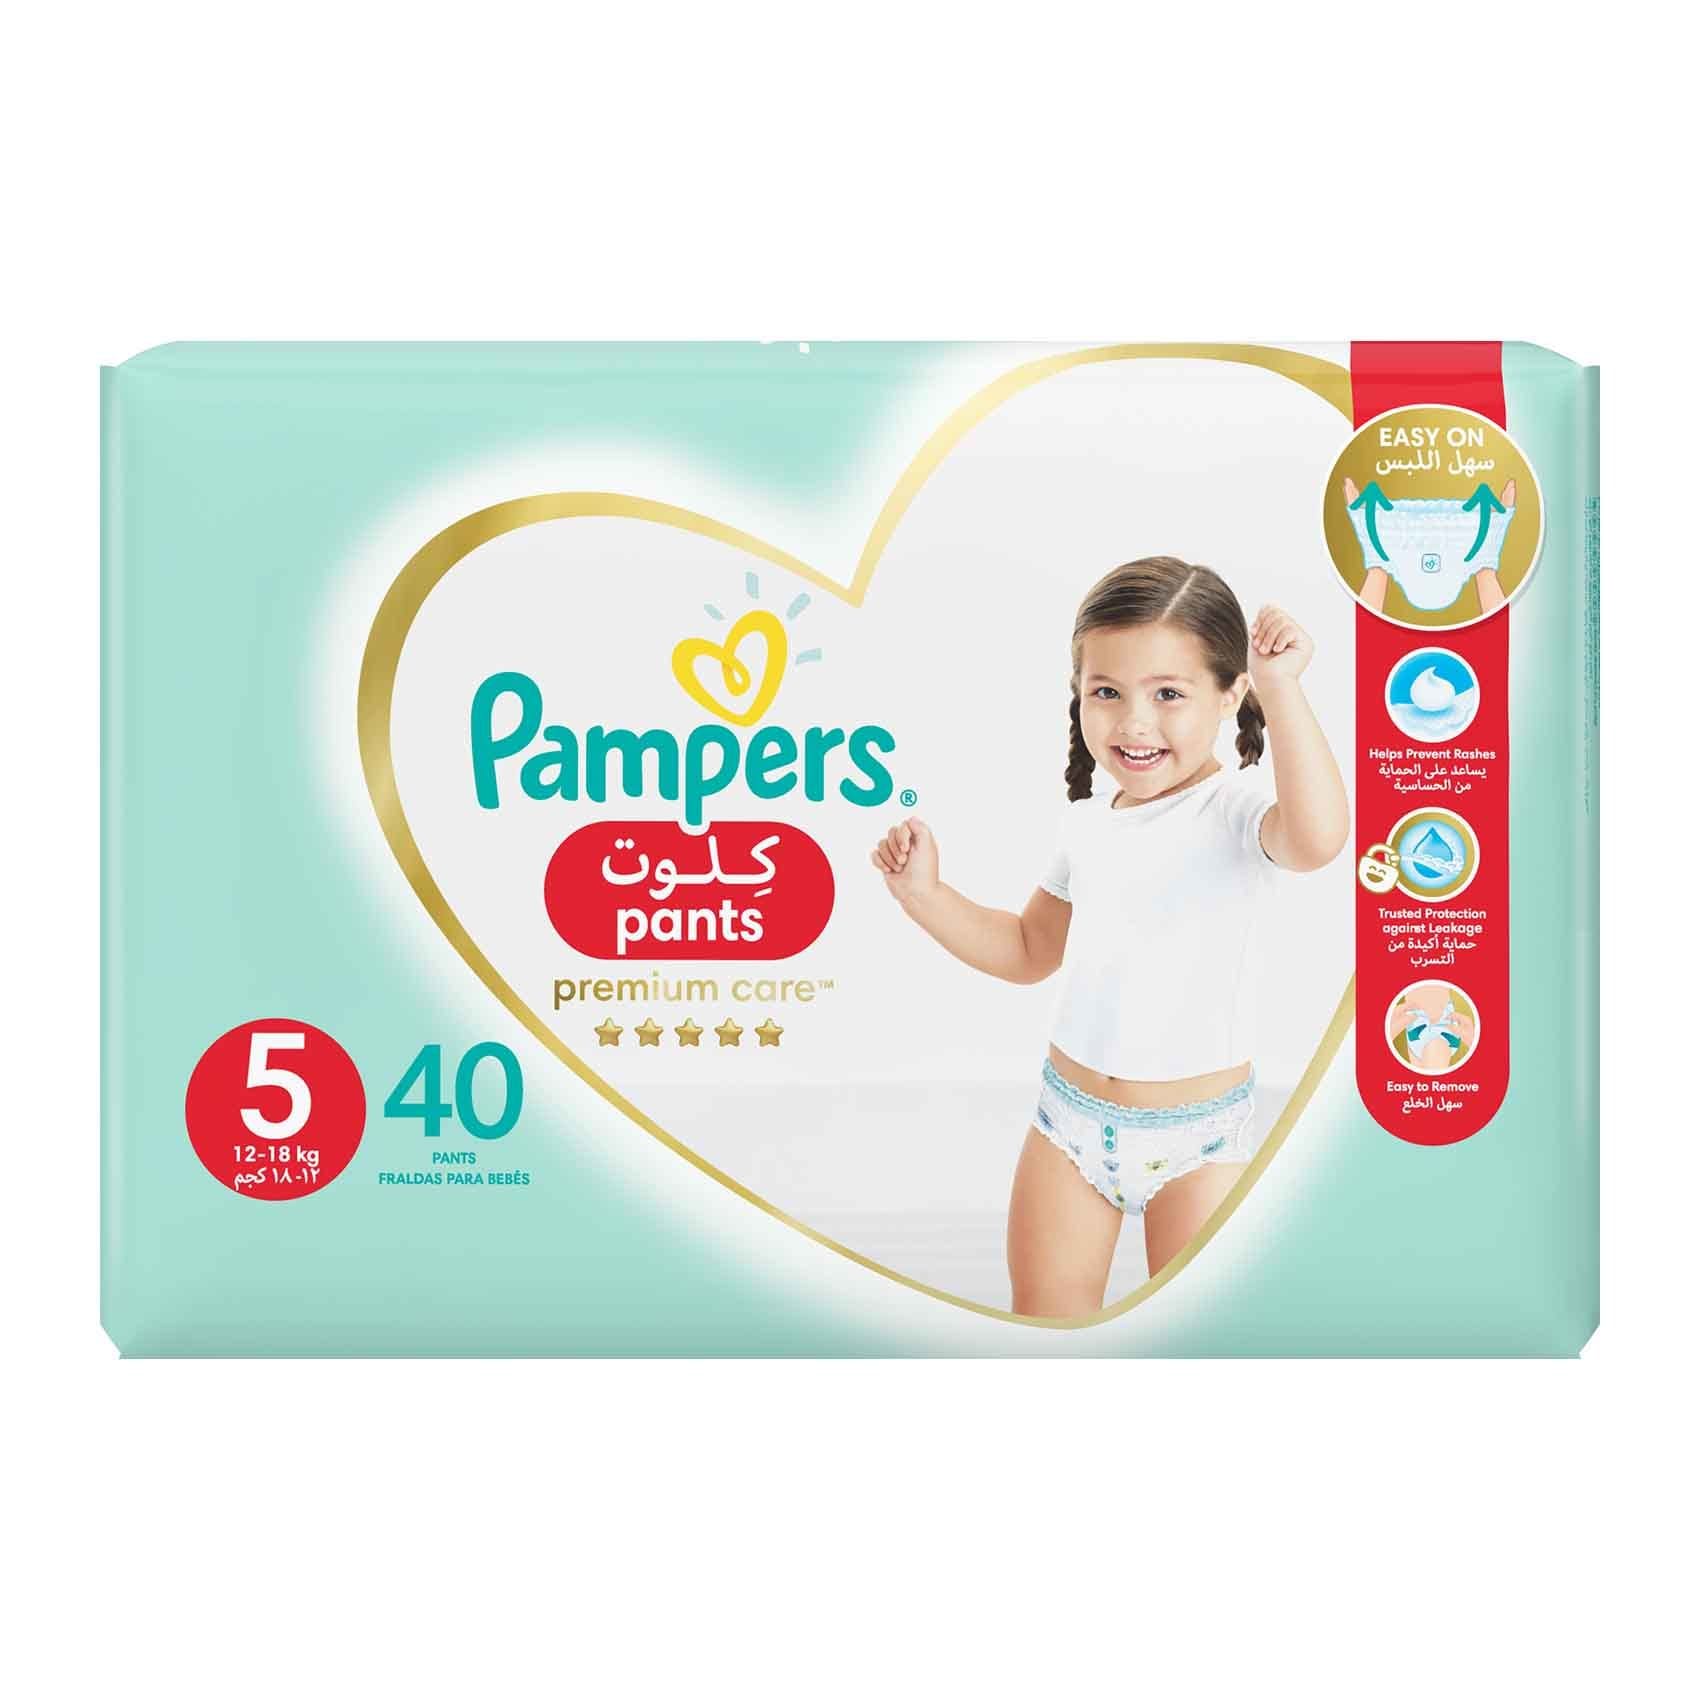 Pampers Premium Care Baby Pants 5 12-18 kg - 40 Diapers Online - Shop Baby Products on Carrefour Egypt